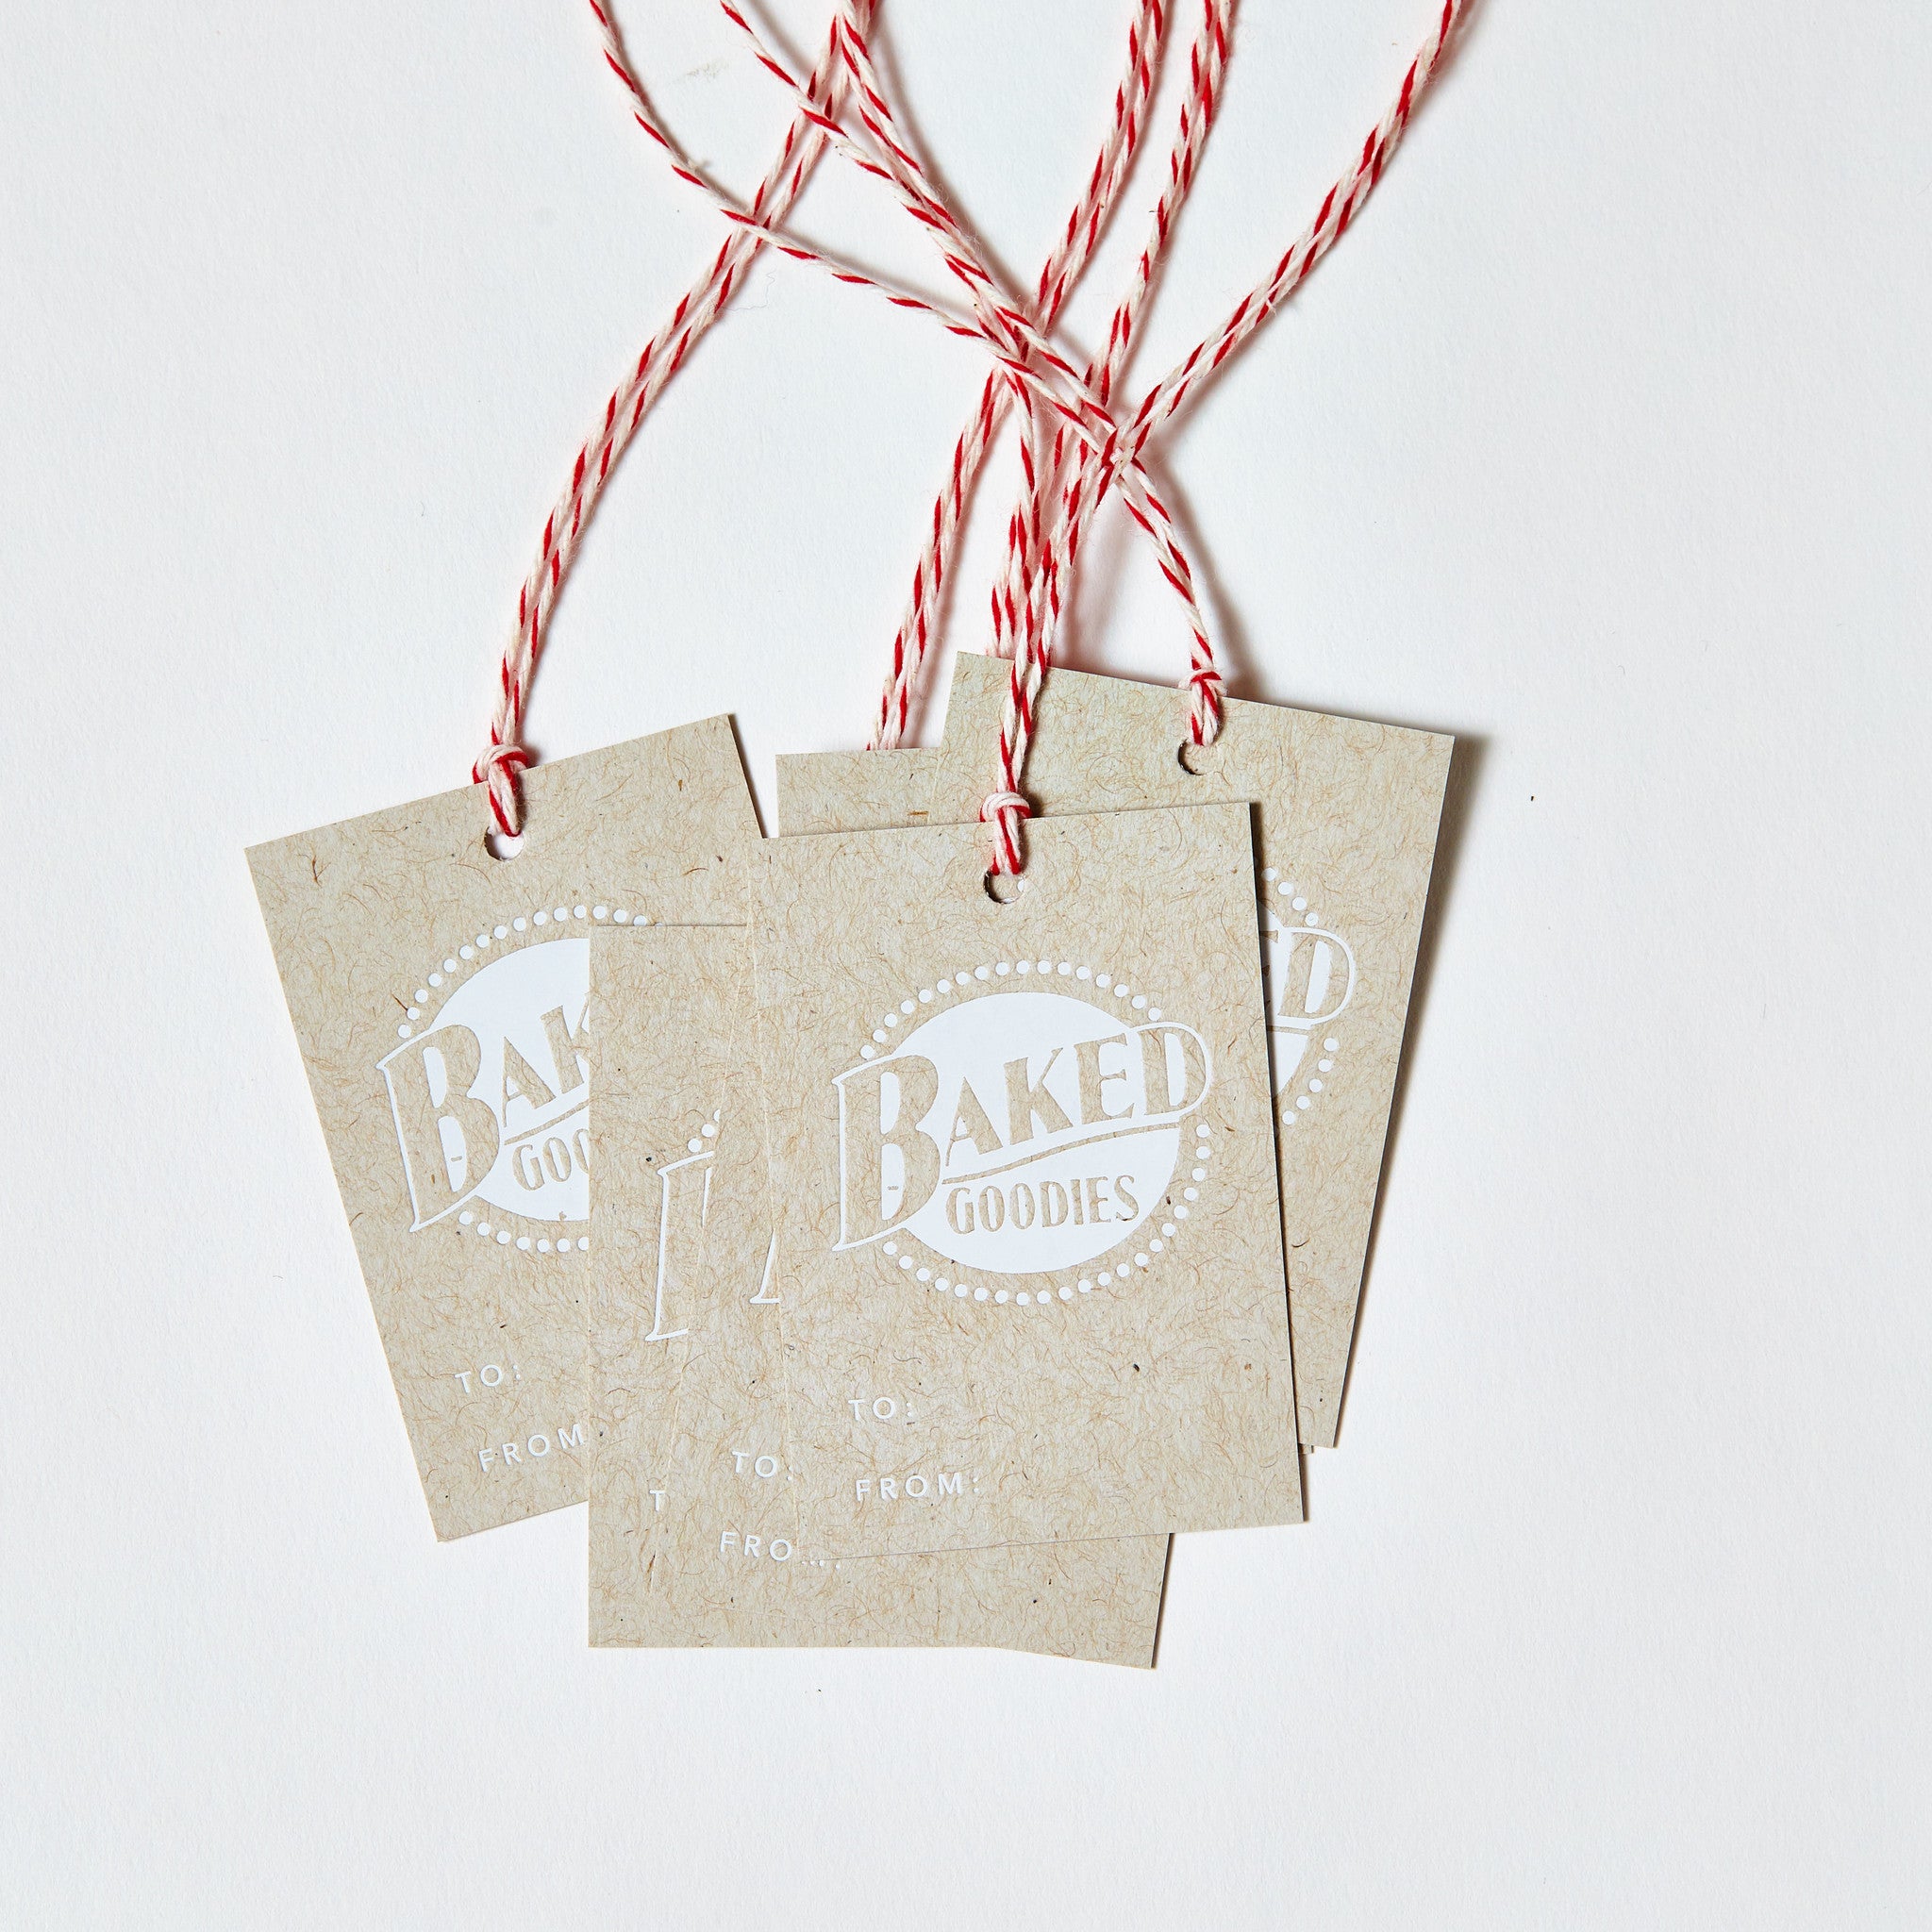 Foil Tag-It Gift Tags